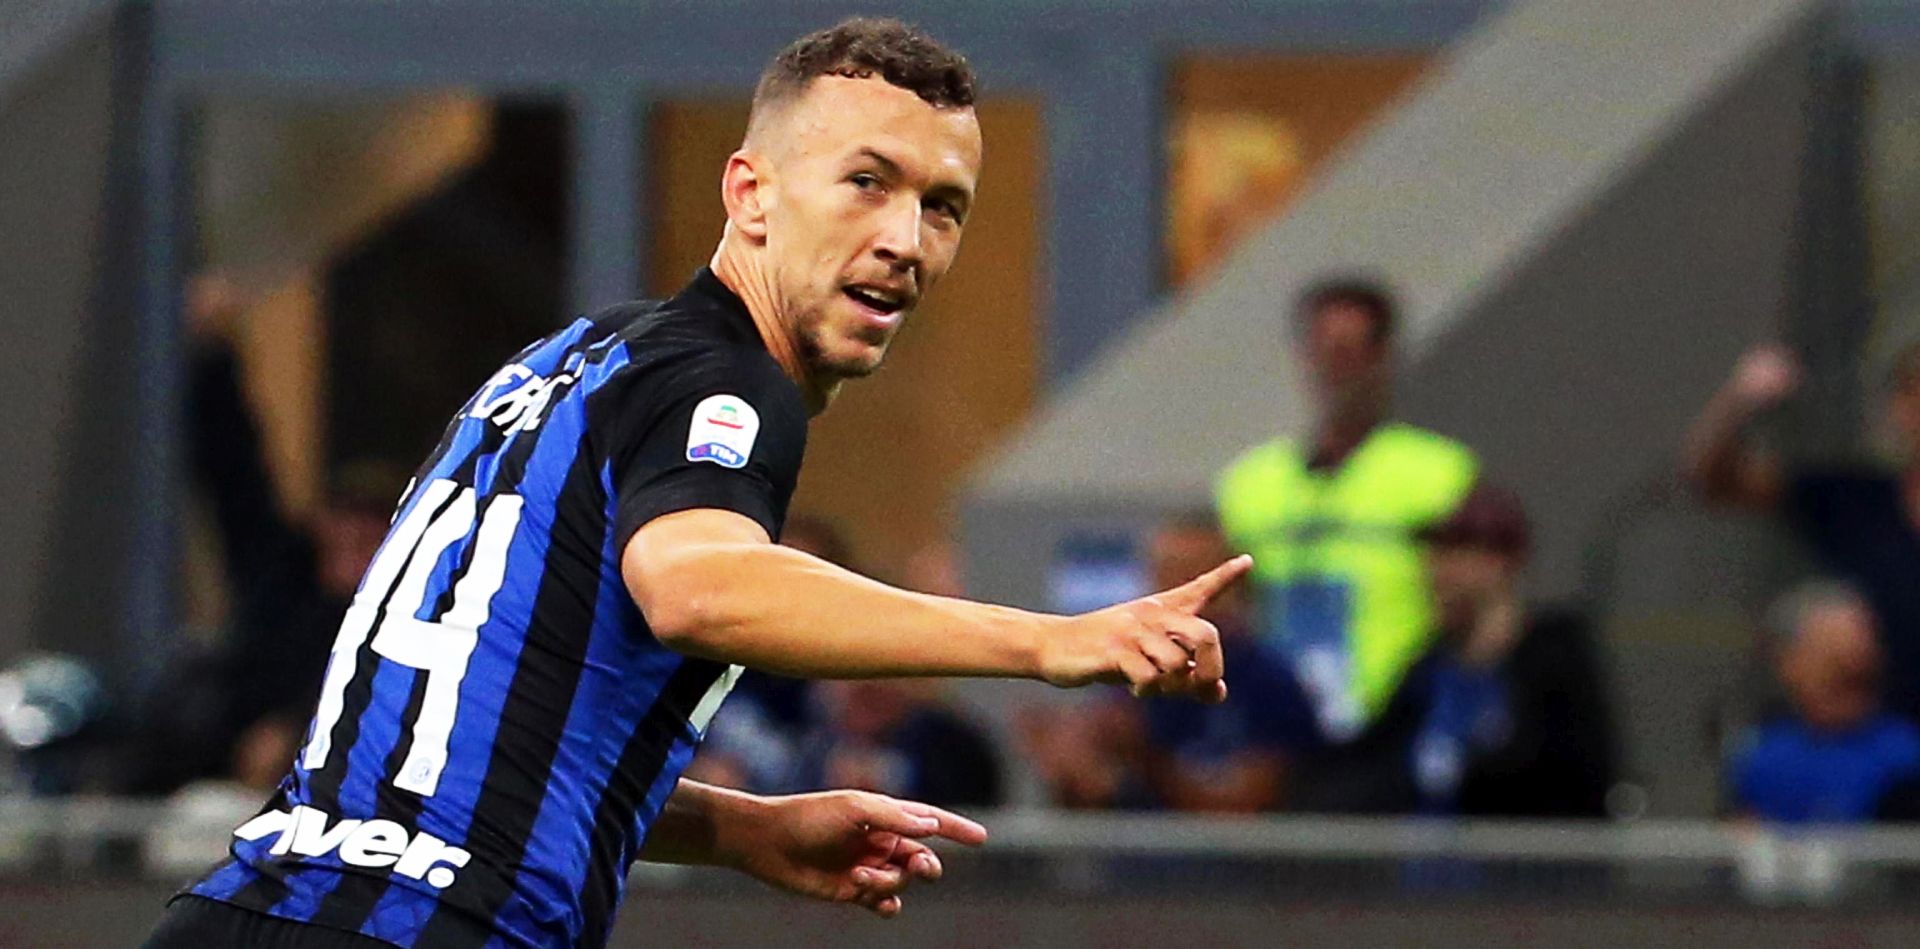 epa06975313 Inter's Ivan Perisic celebrates after scoring the 1-0 lead during the Italian Serie A soccer match between Inter Milan and Torino FC in Milan, Italy, 26 August 2018.  EPA/MATTEO BAZZI